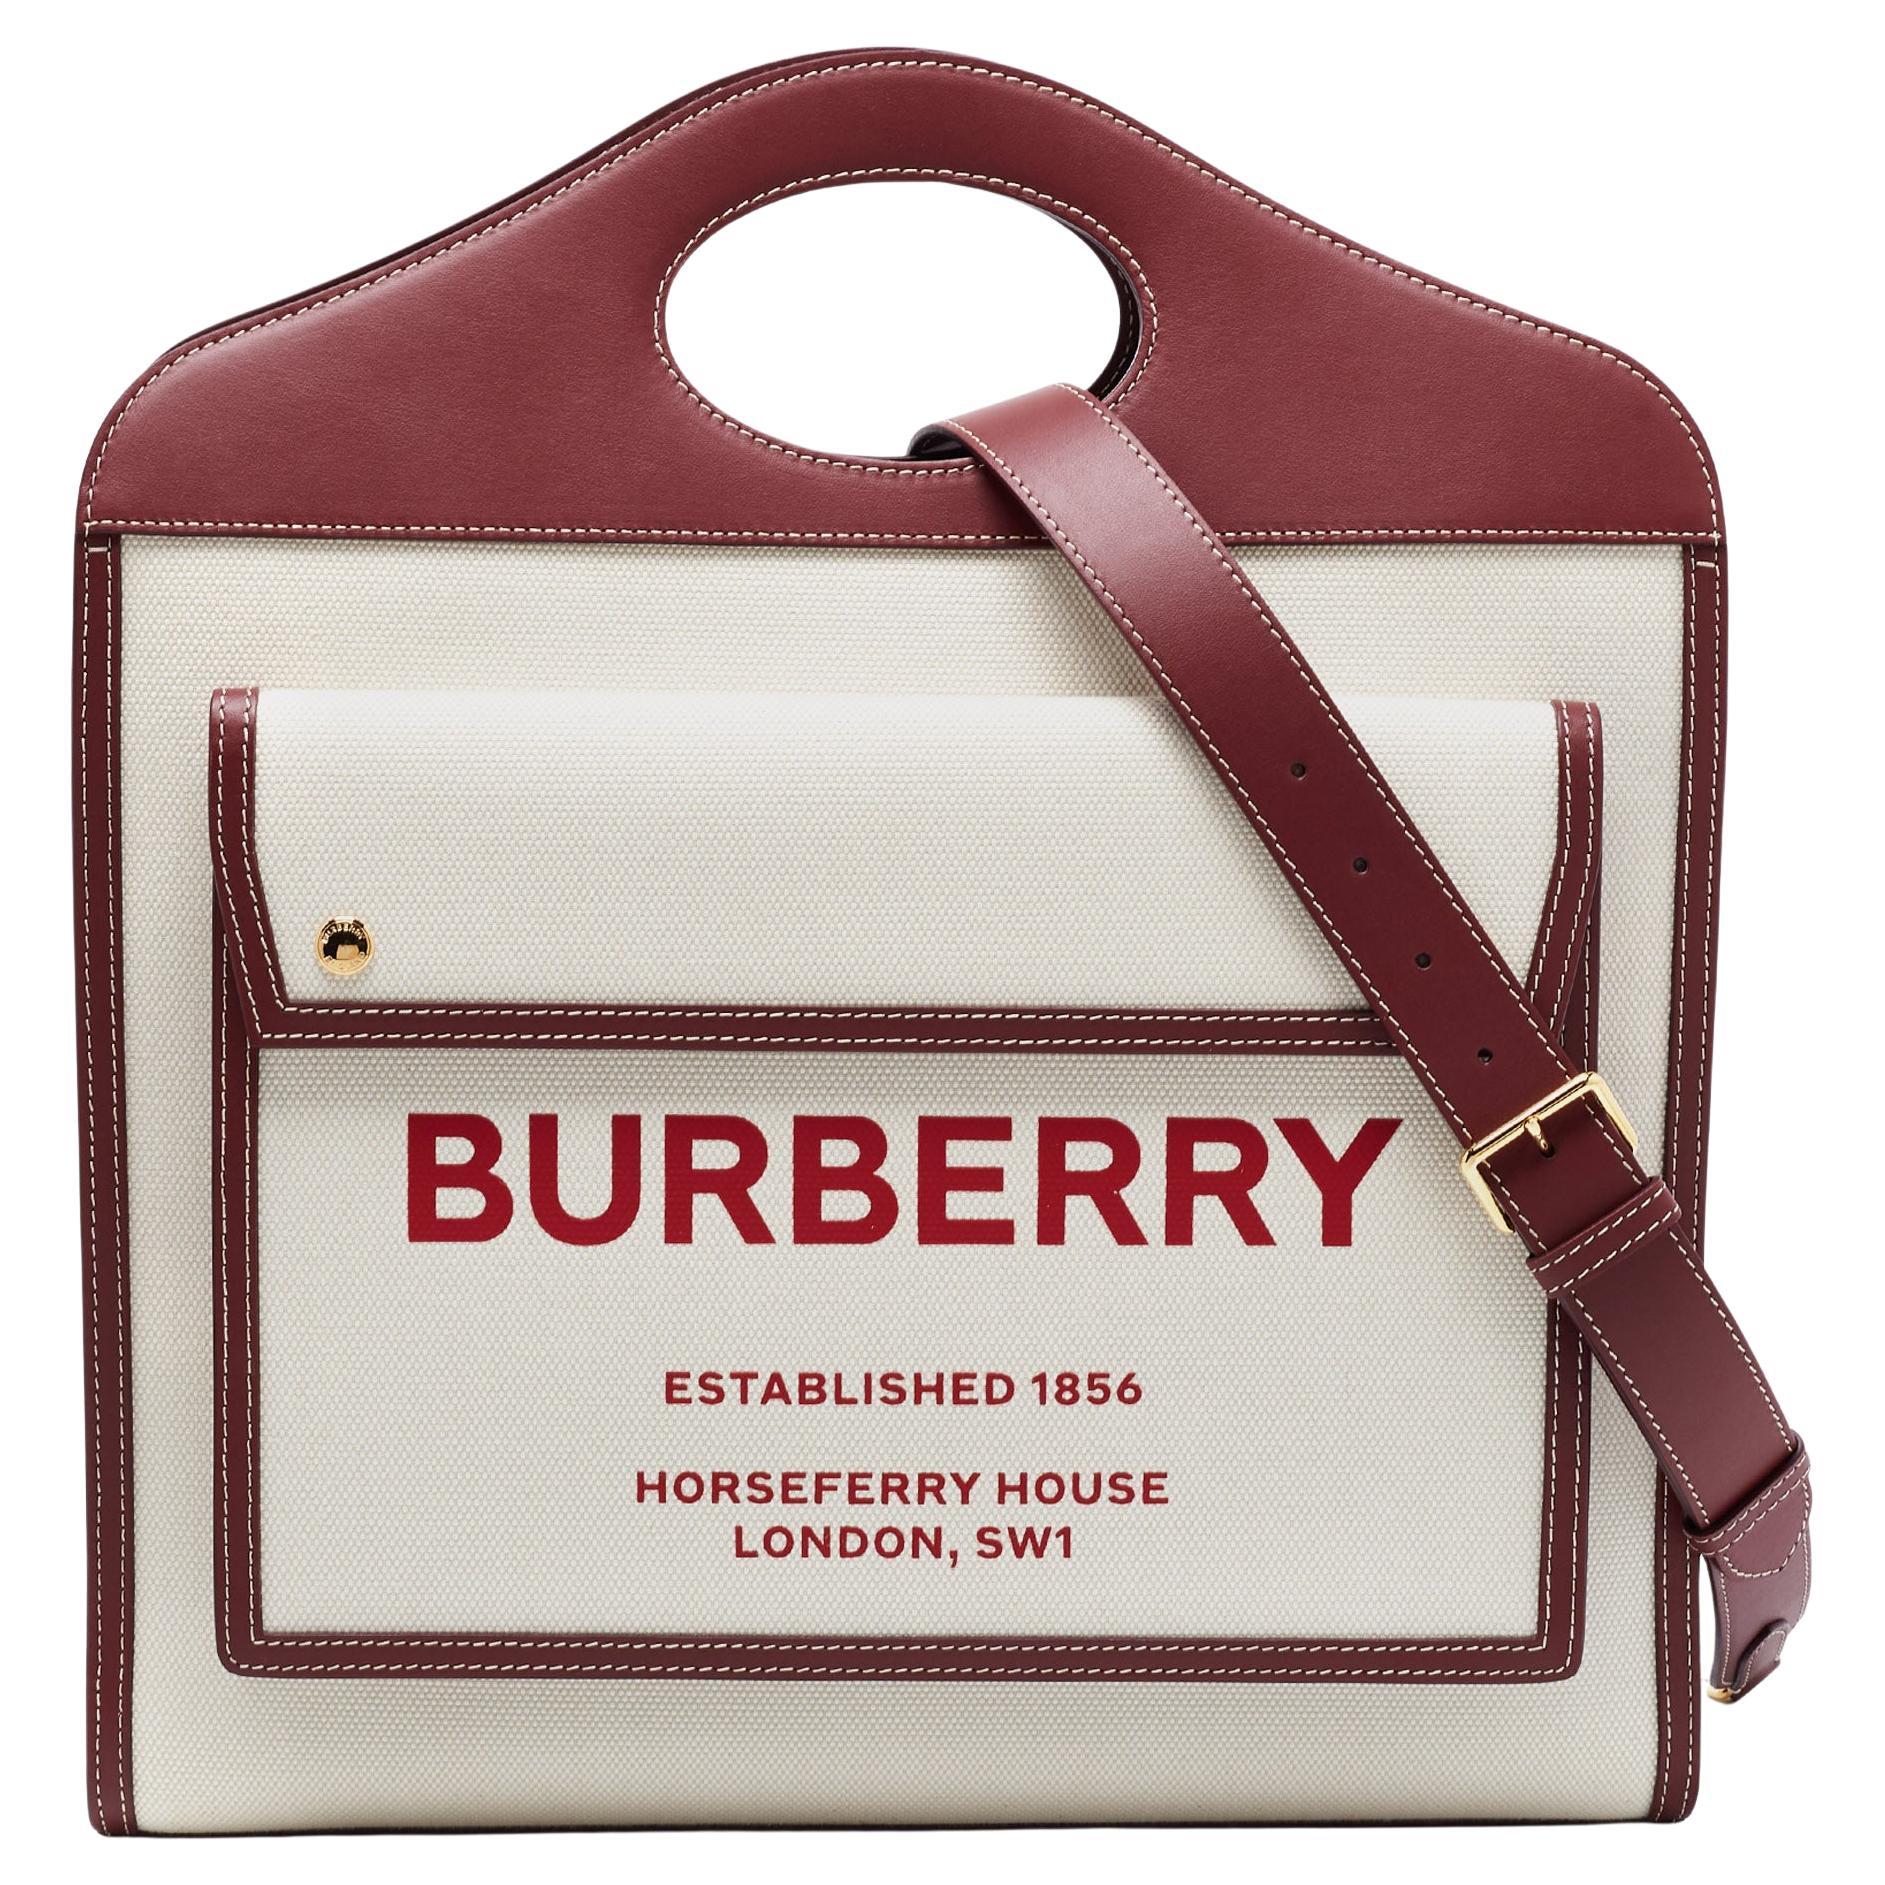 Burberry Pre-owned Women's Leather Shoulder Bag - Burgundy - One Size